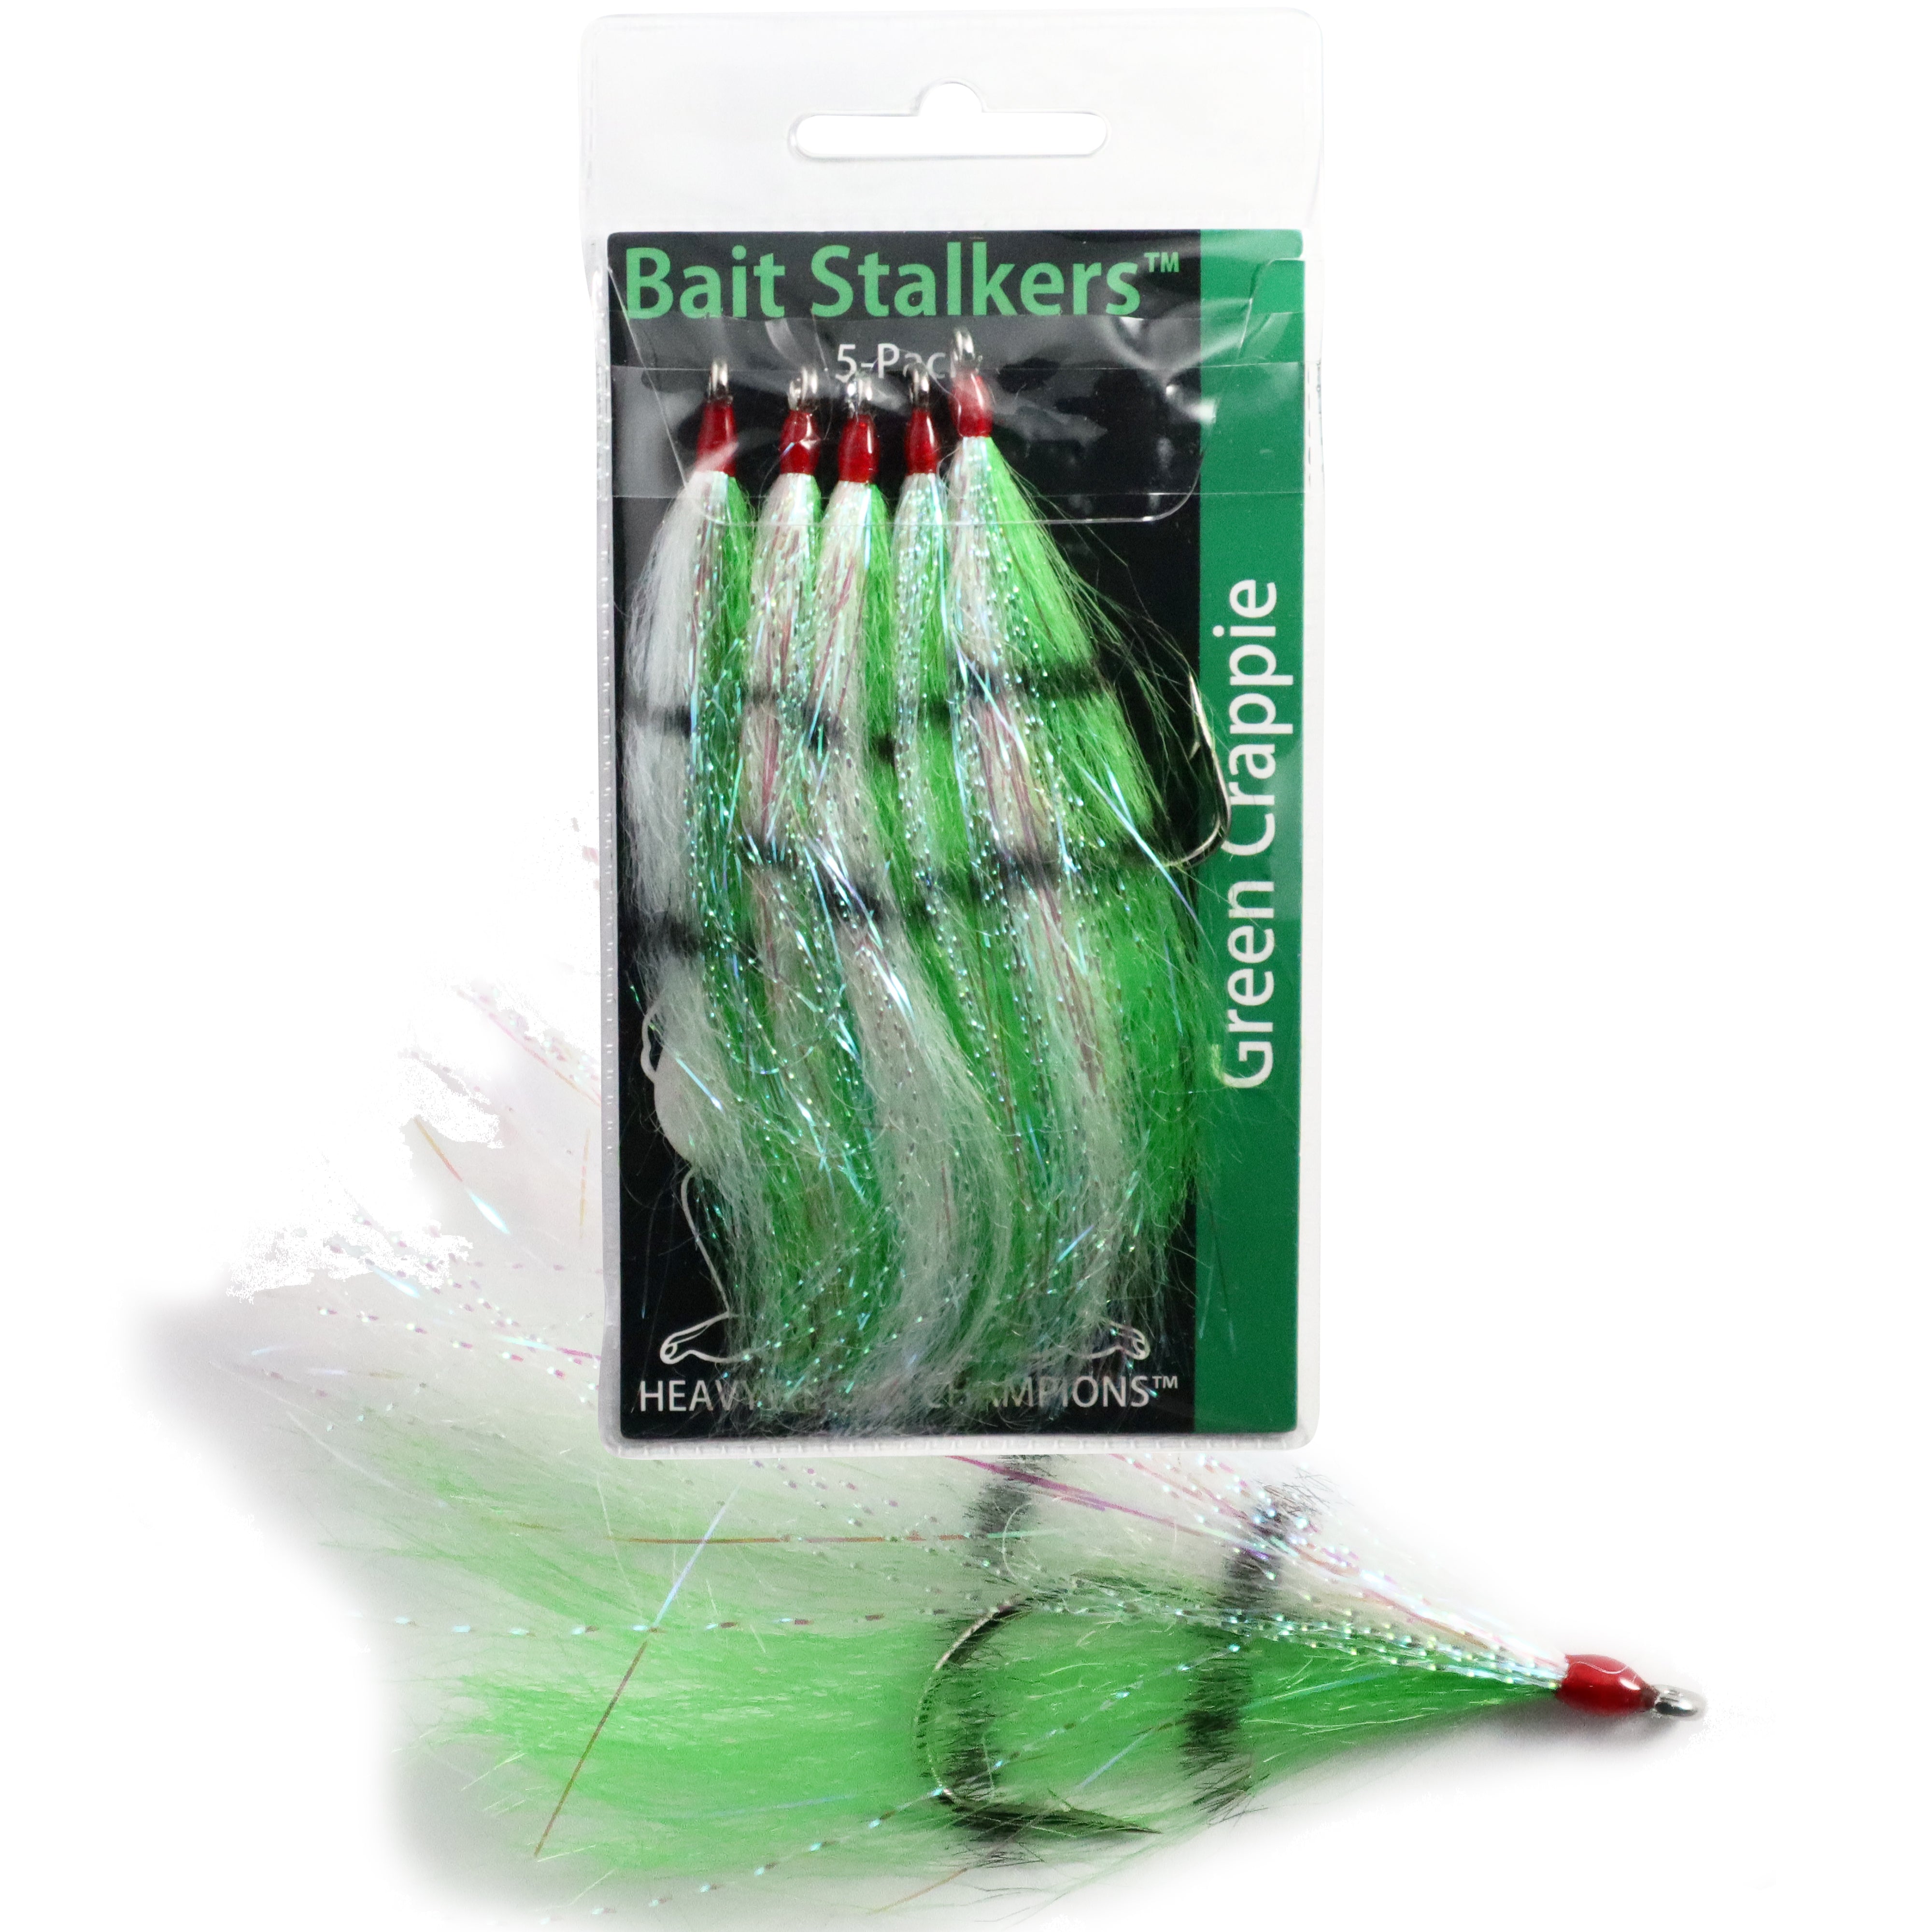 Bait Stalkers: Stinger Flies to Catch Extra Catfish, 5-Pack, Green Crappie